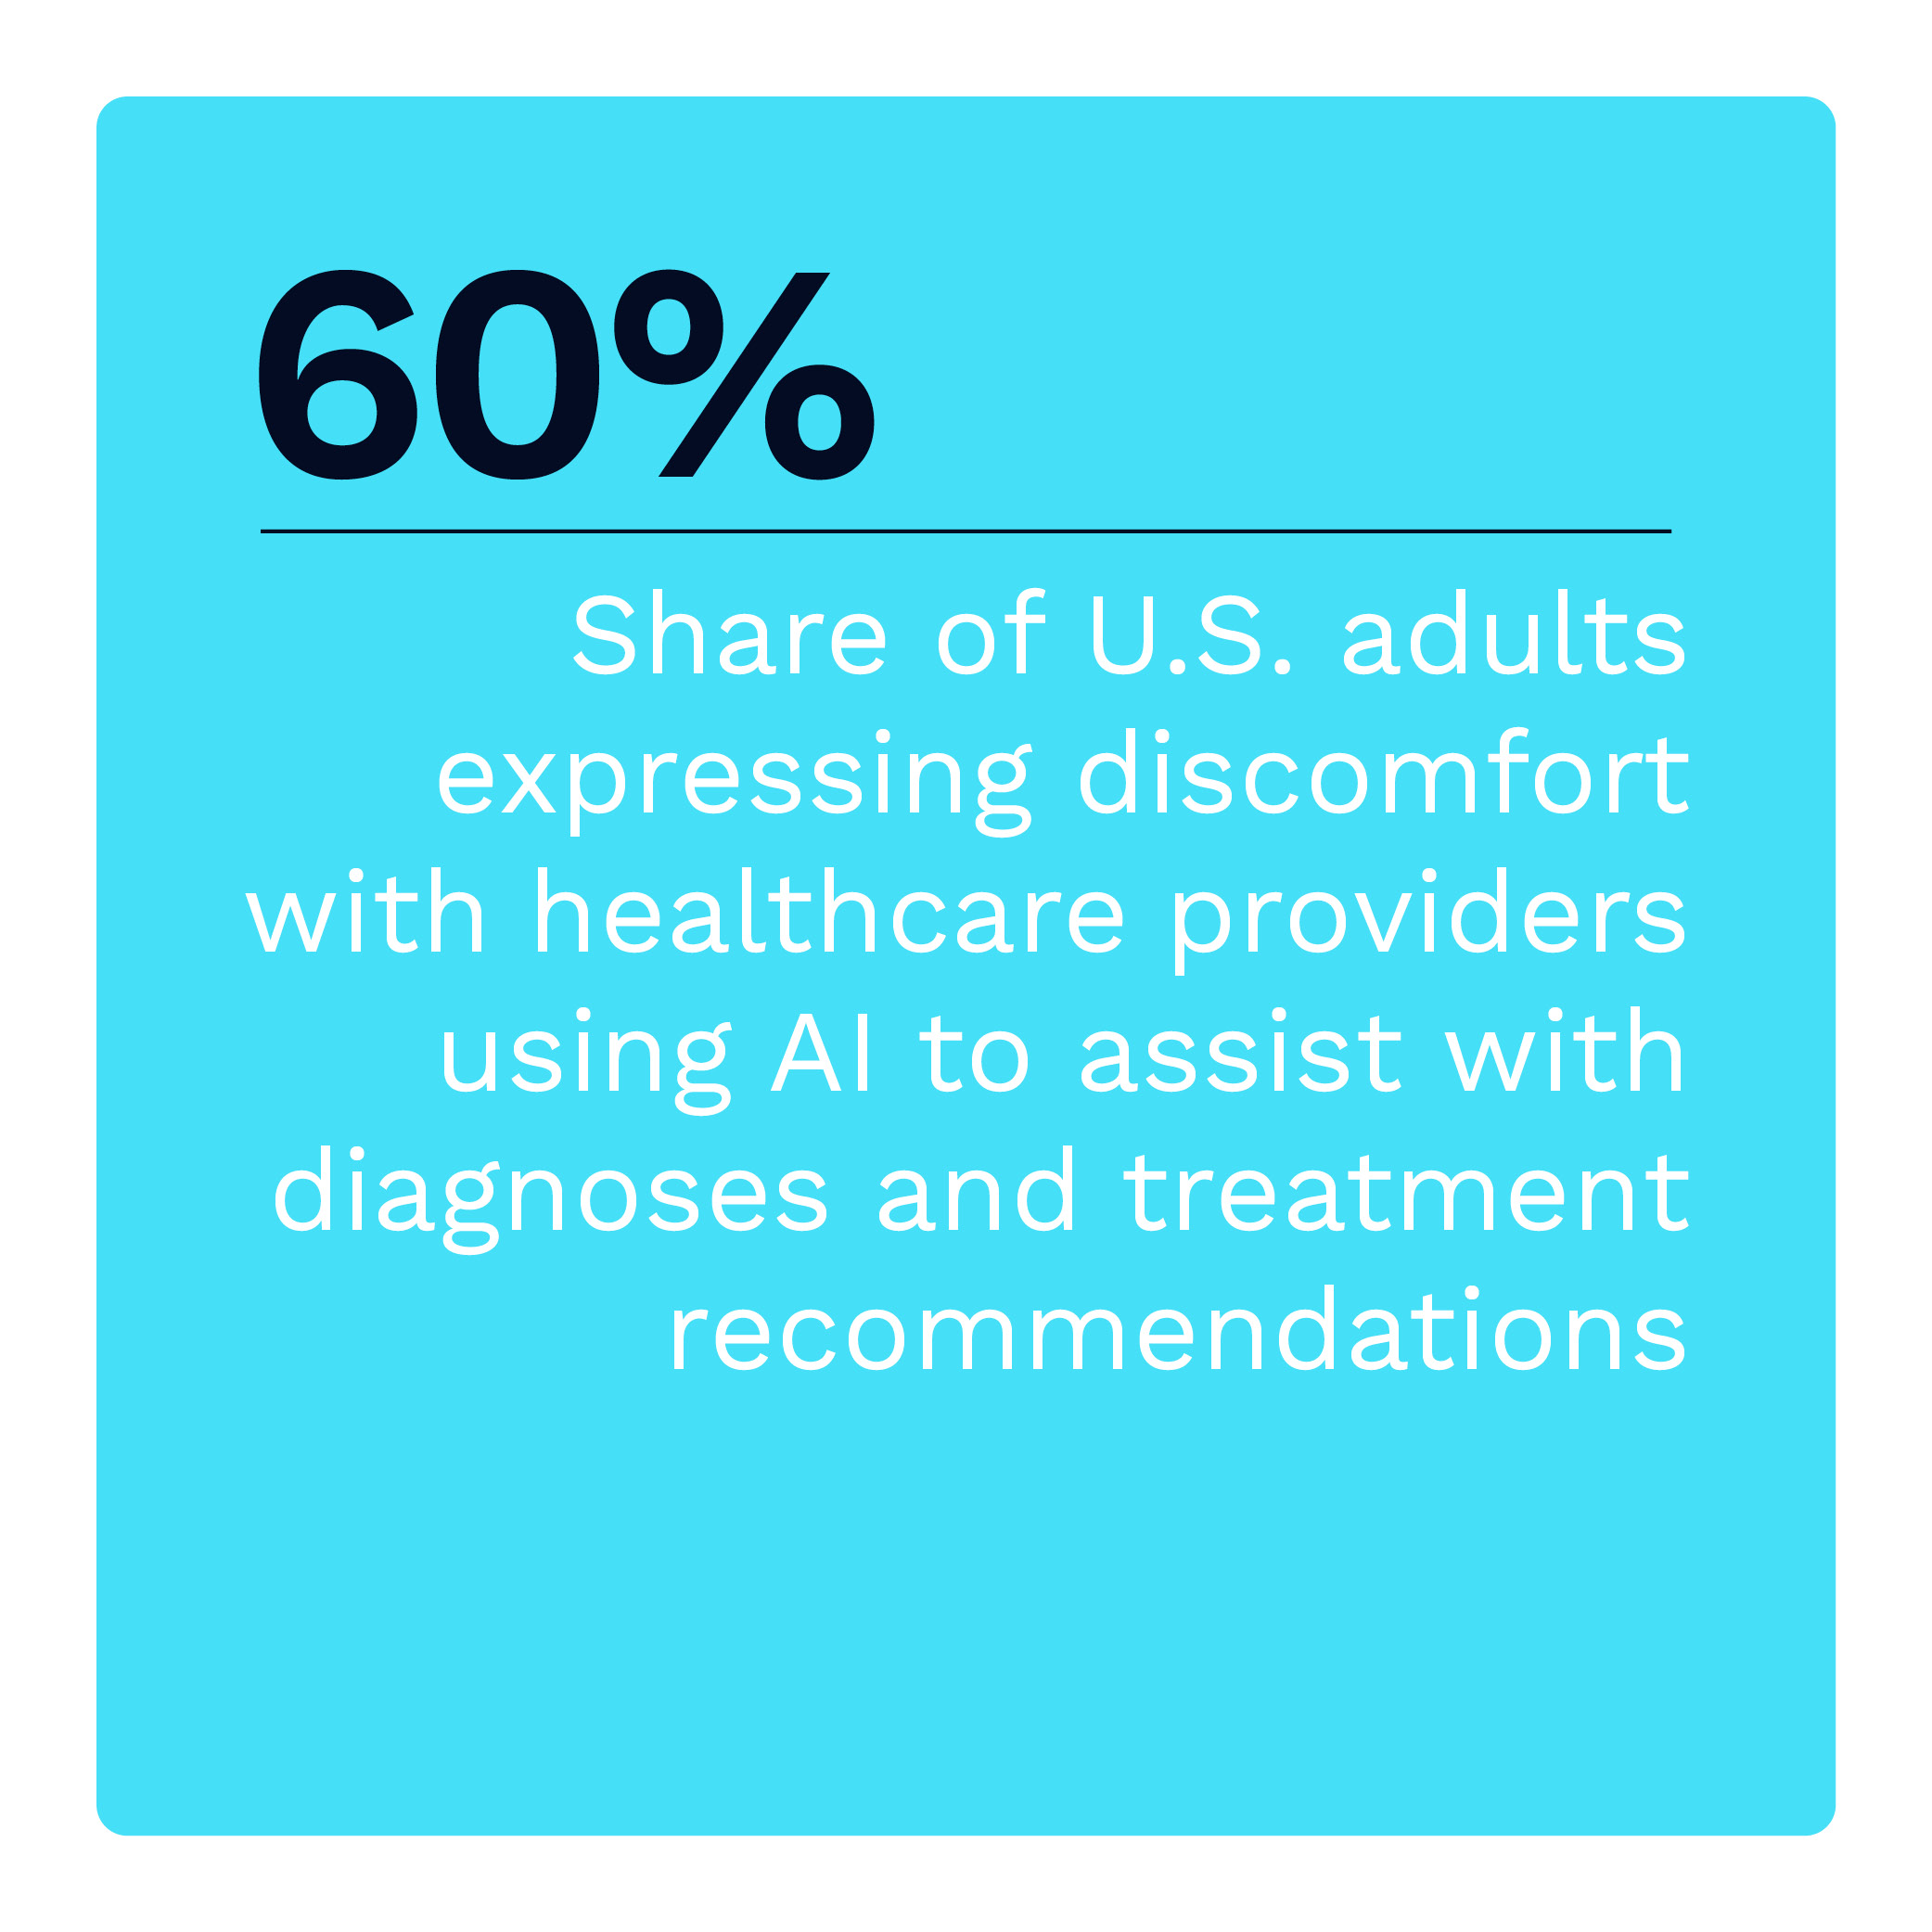 60%: Share of U.S. adults expressing discomfort with healthcare providers using AI to assist with diagnoses and treatment recommendations